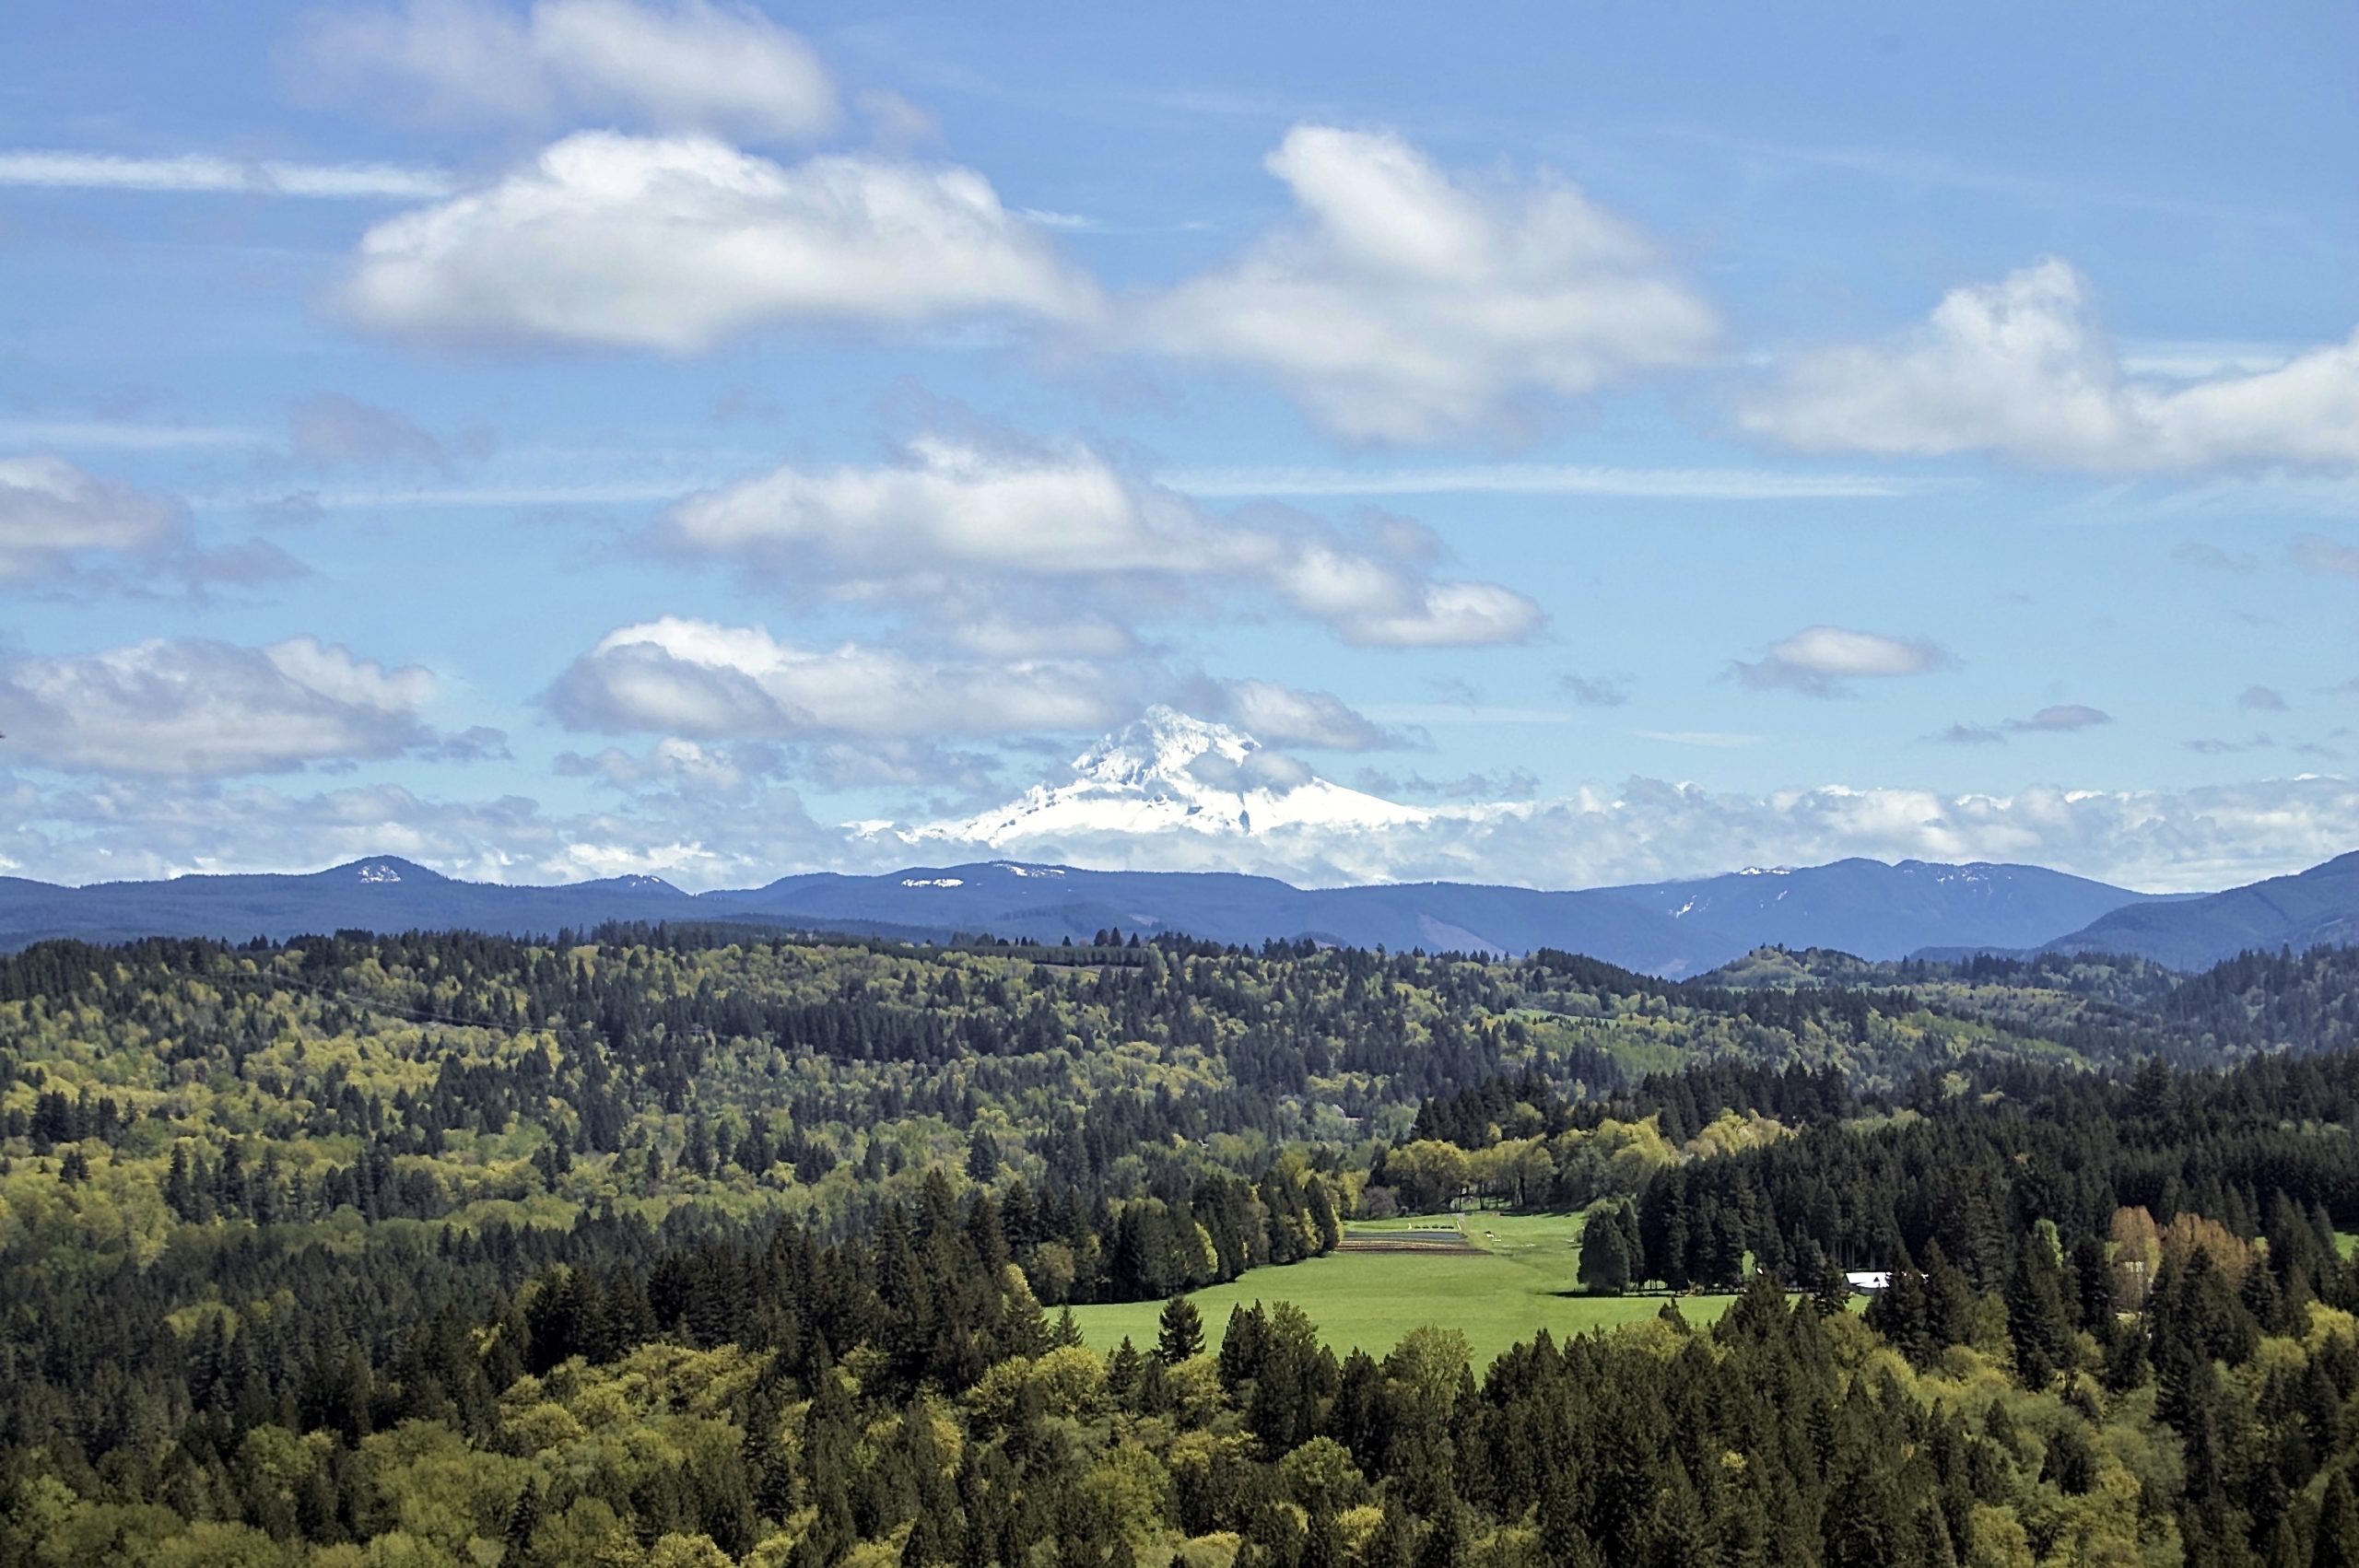 A small break in the clouds for Mt. Hood to appear as seen from Sandy, Oregon